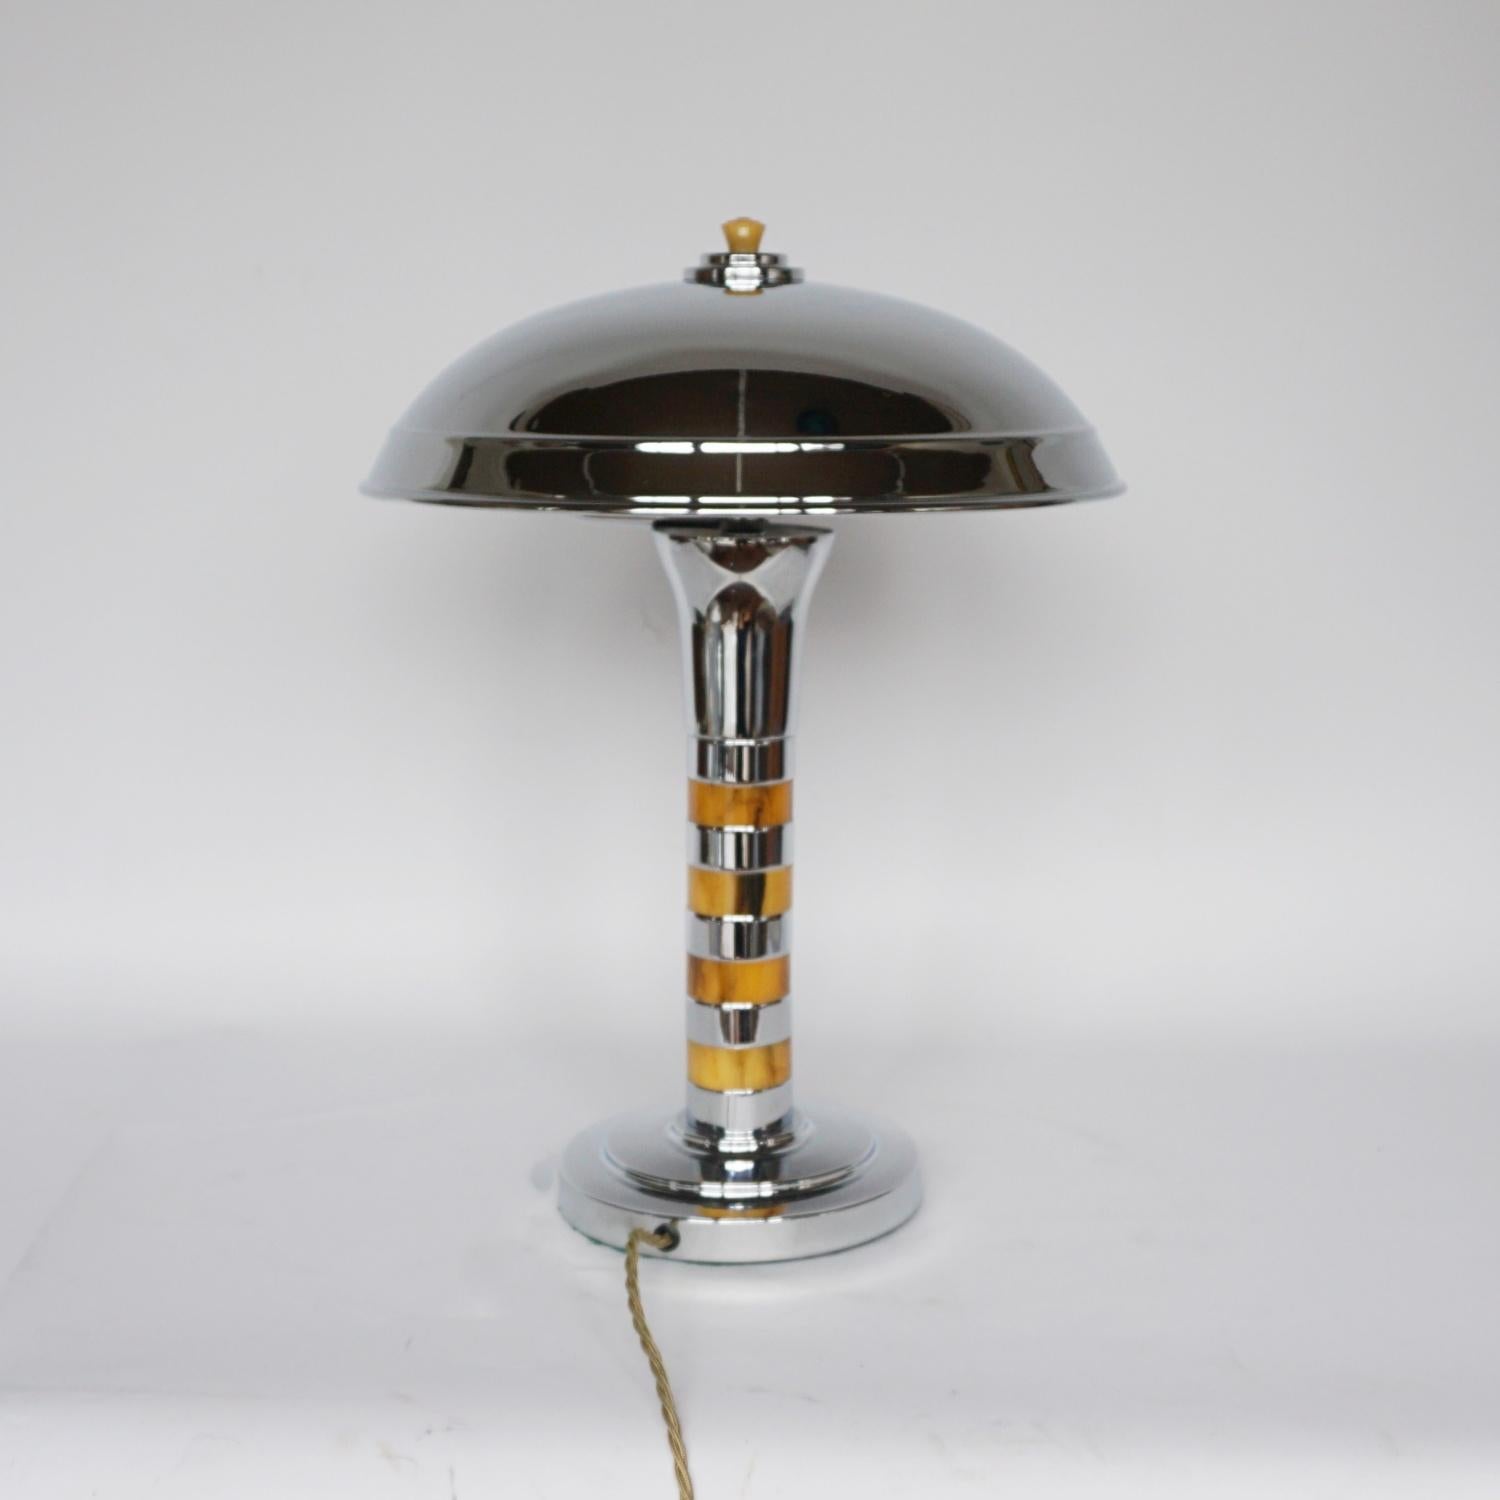 English Art Deco Bakelite and Chromed Metal Dome Lamp For Sale